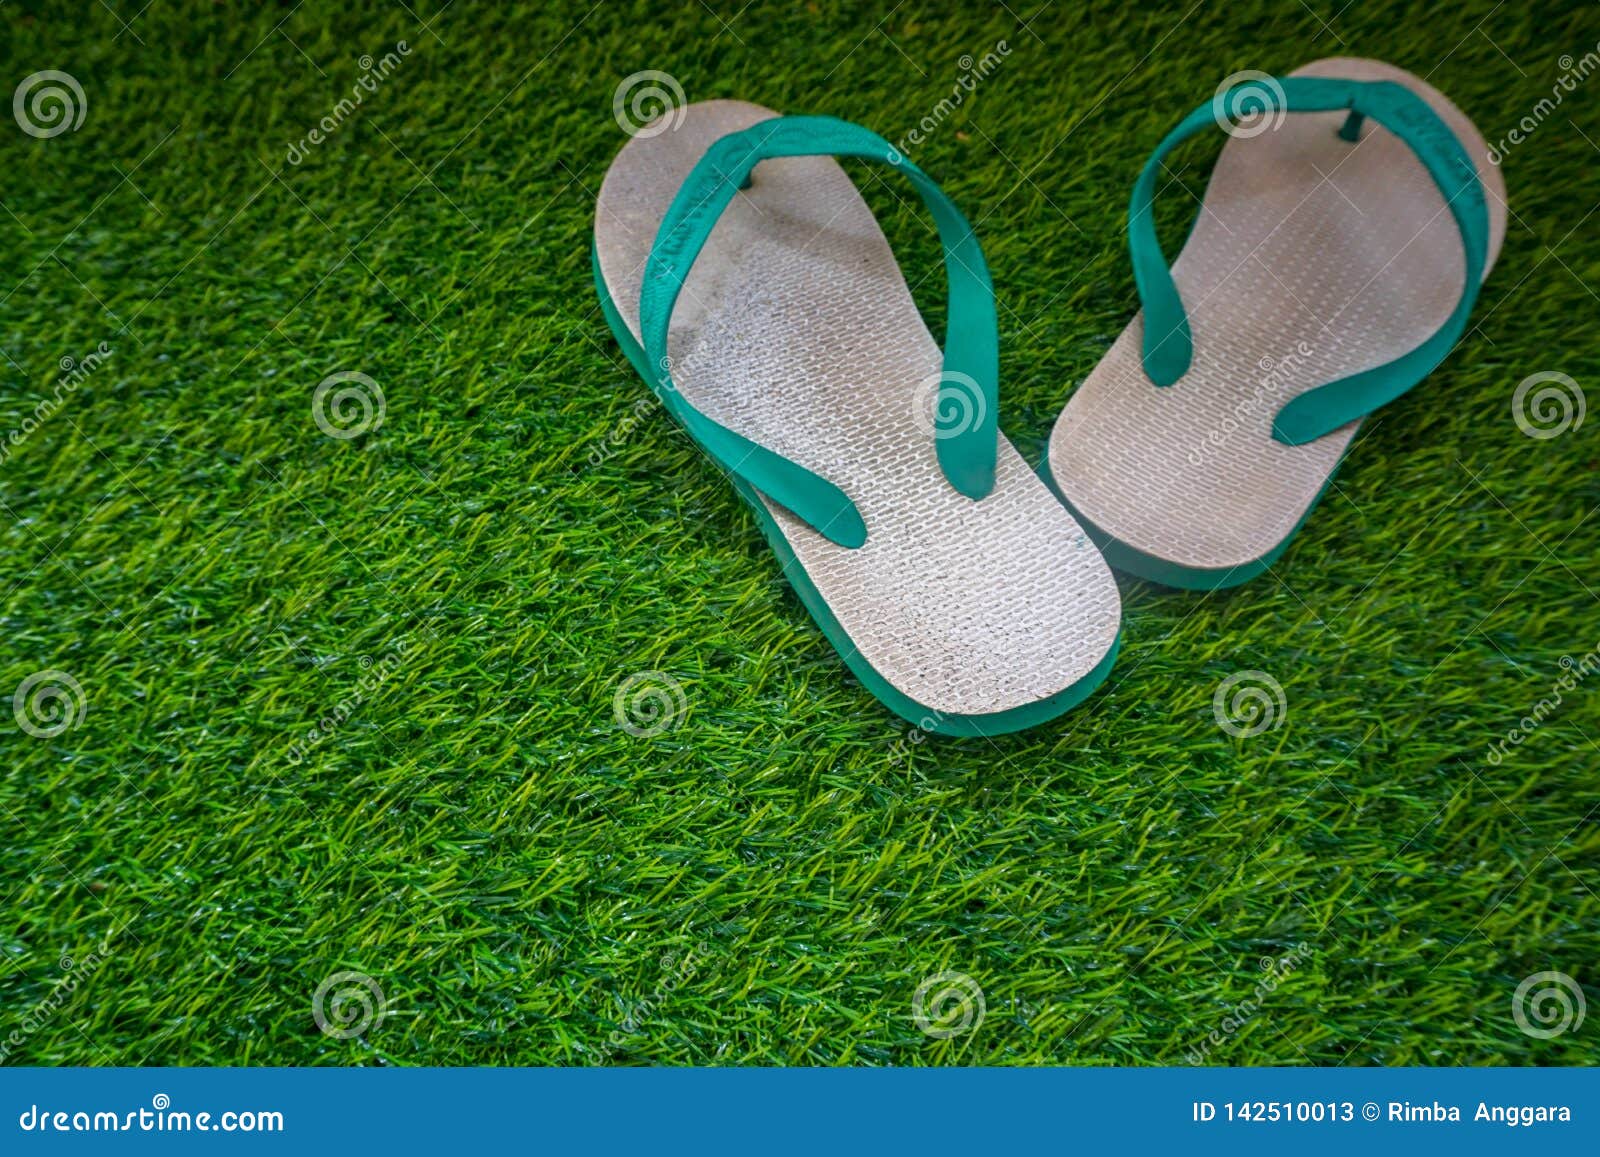 Sandal Jepit As Traditional Indonesian Footwear Editorial Stock Photo ...